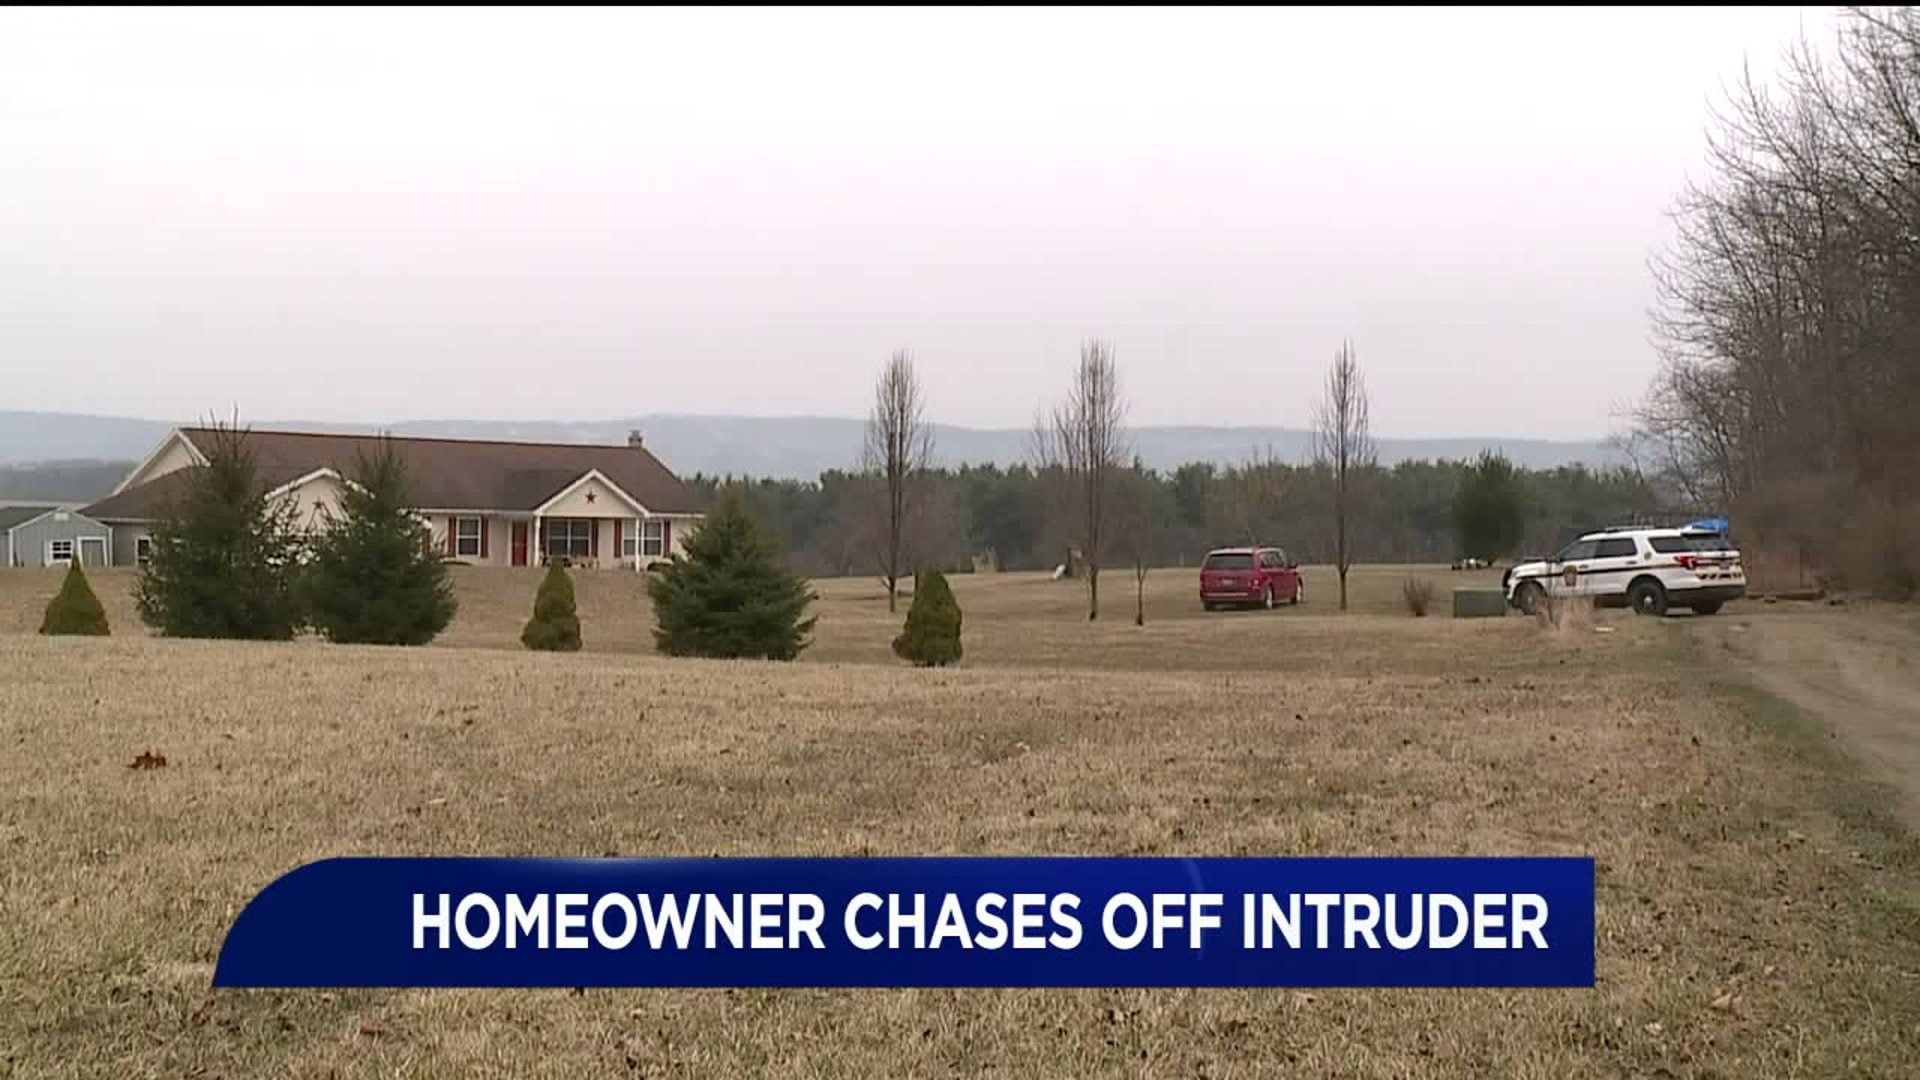 Armed Homeowner Chases Off Armed Intruder